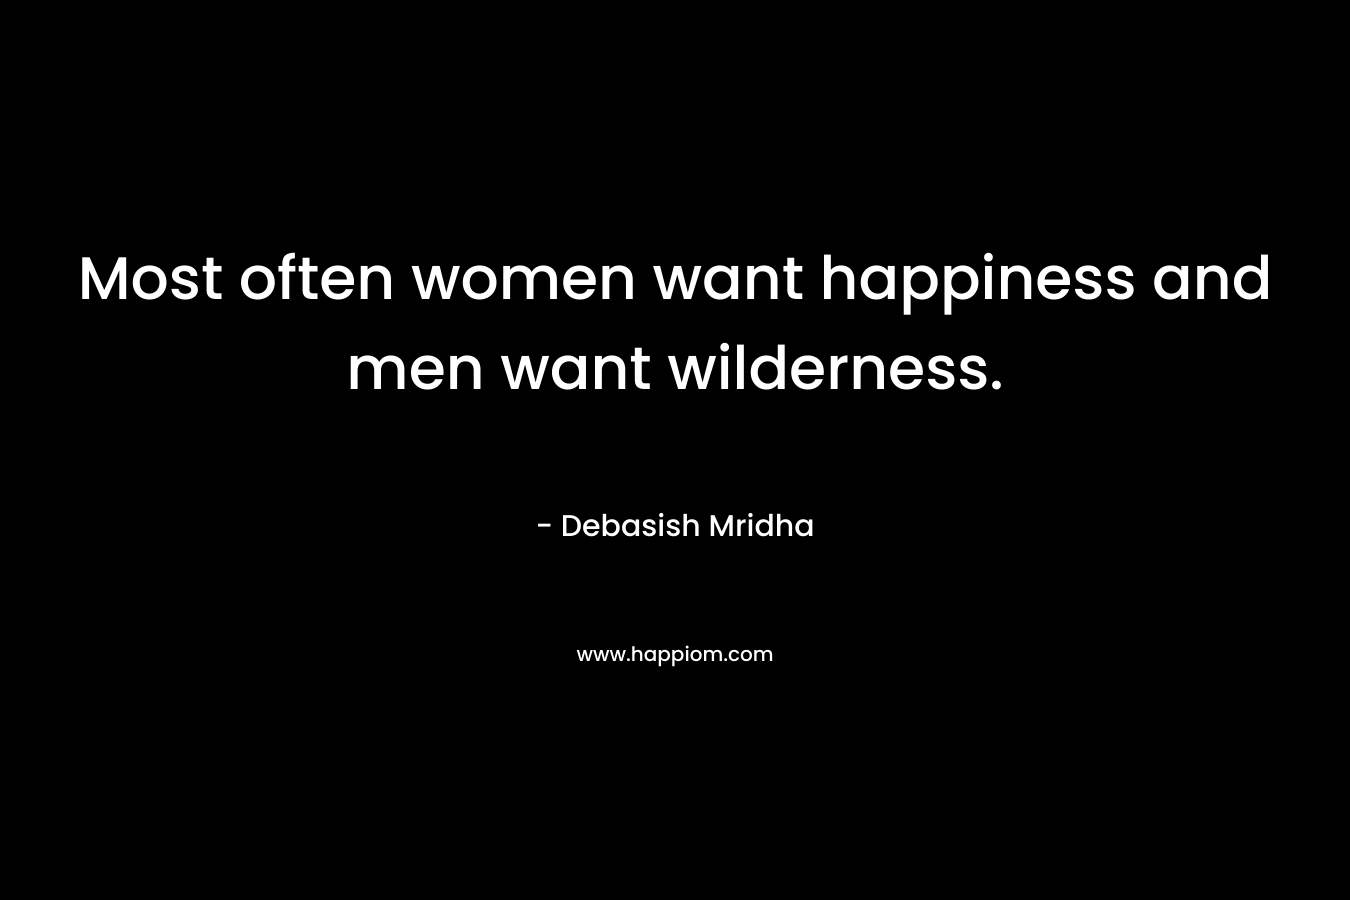 Most often women want happiness and men want wilderness.